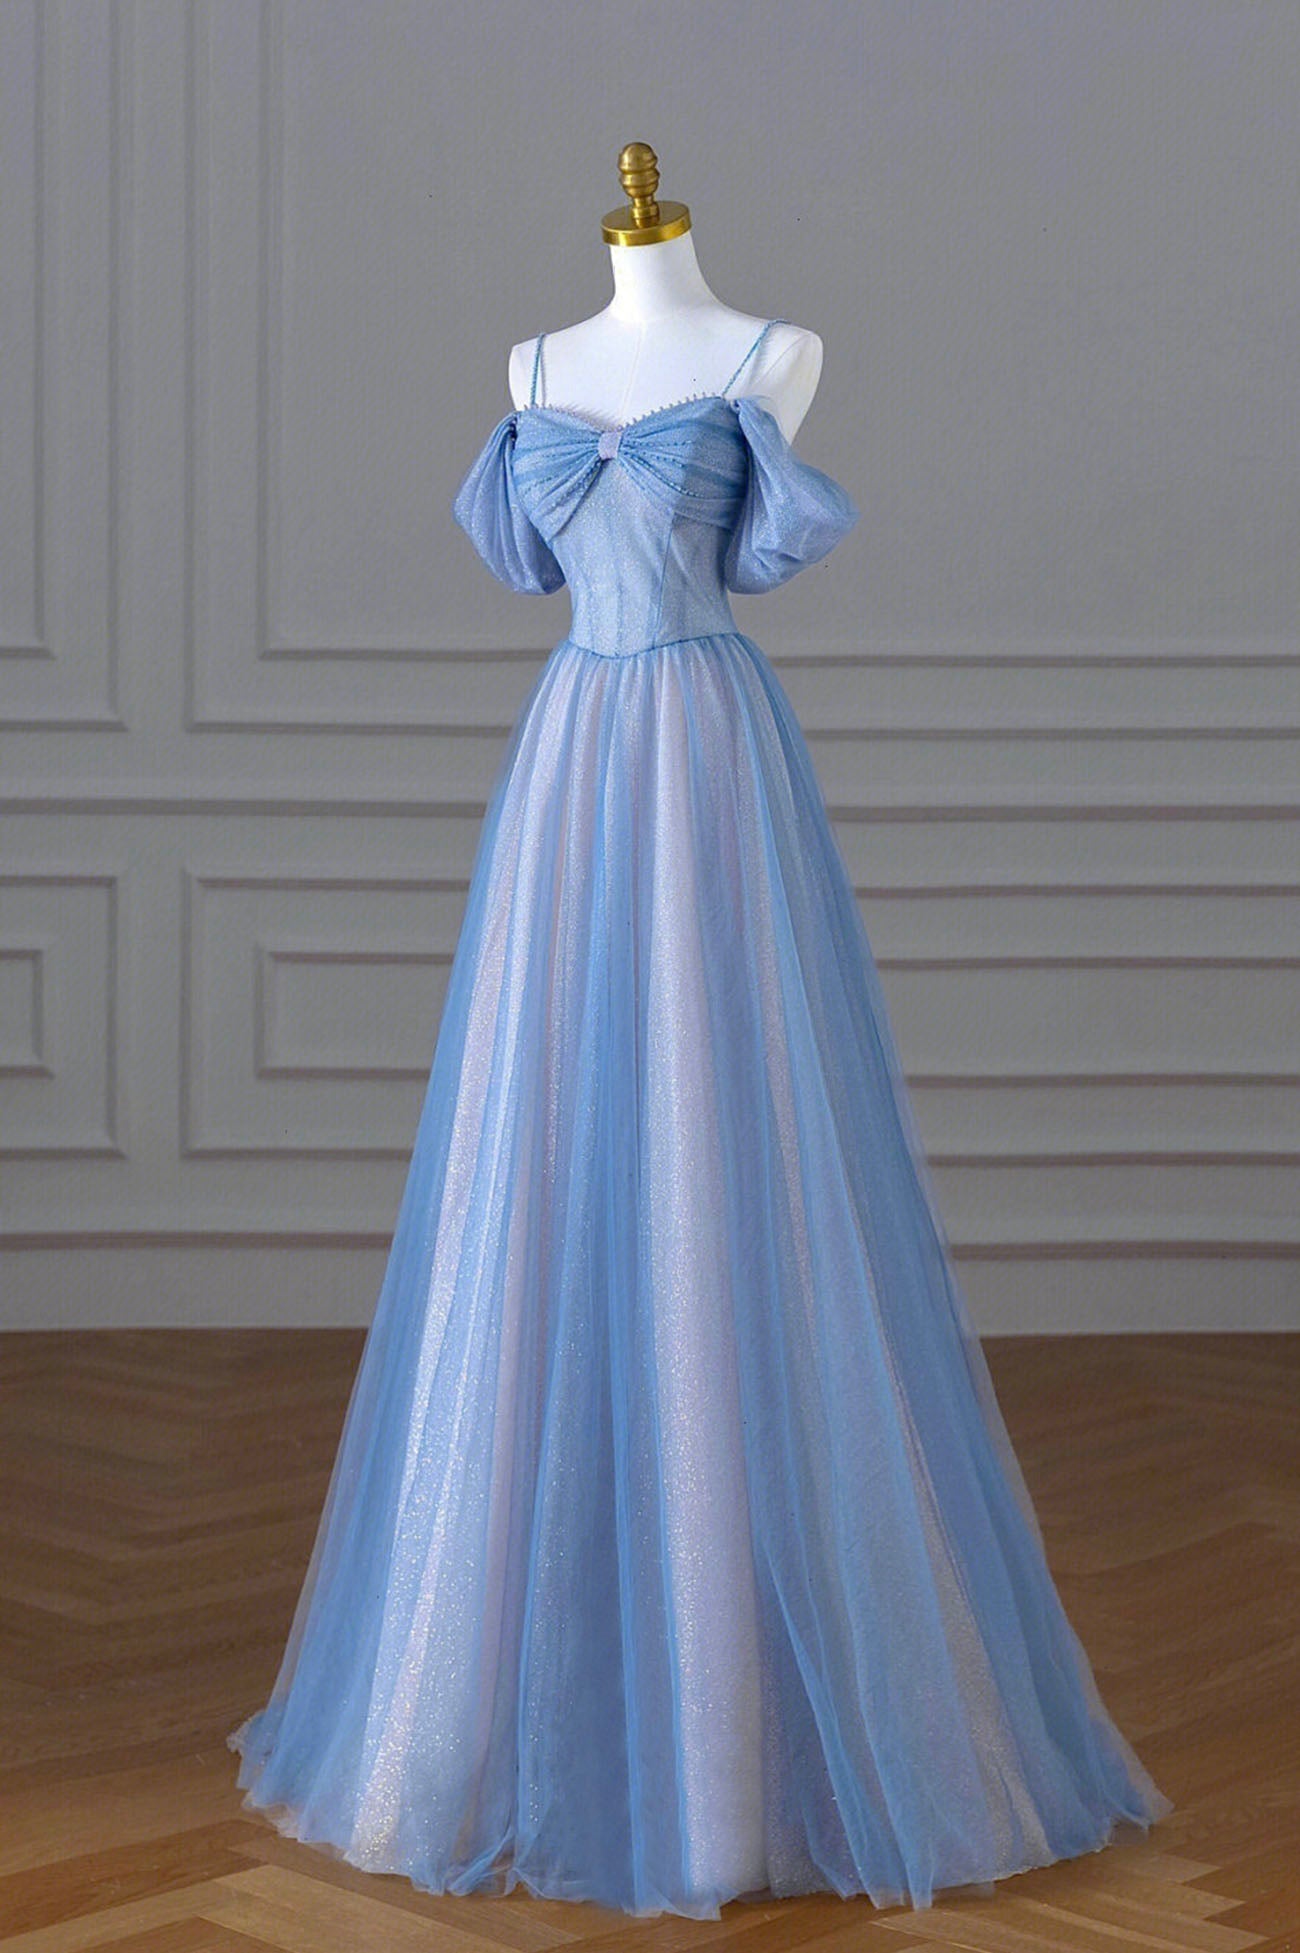 Party Dresses Sales, Blue Spaghetti Strap Tulle Floor Length Prom Dress, A-Line Evening Dress